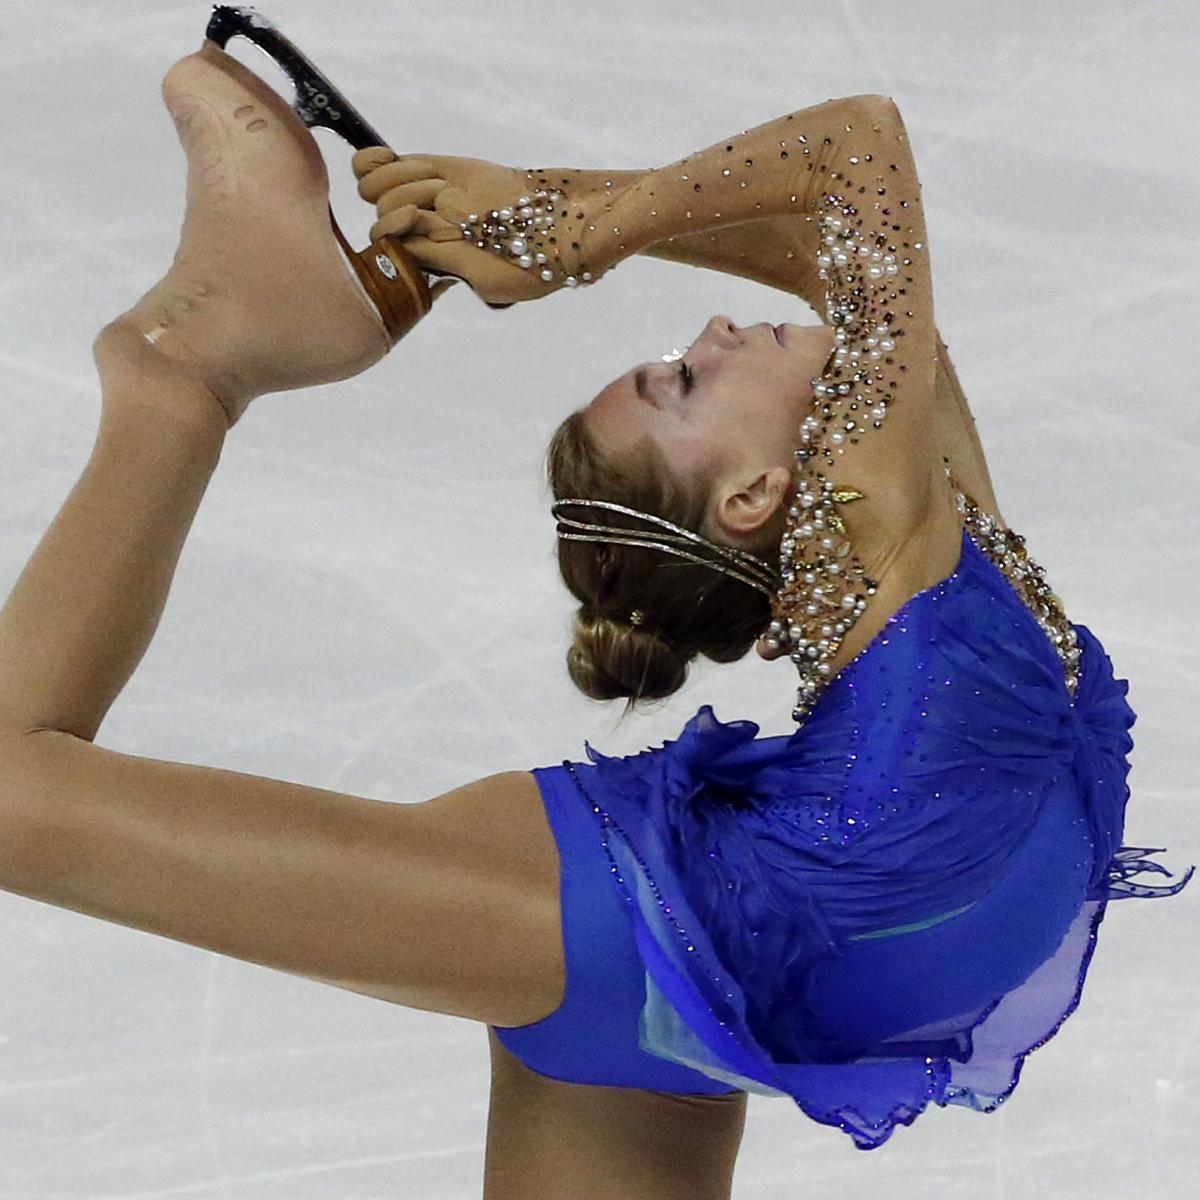 ISU Figure Skating Grand Prix 2014 Results, Top Finishers from France